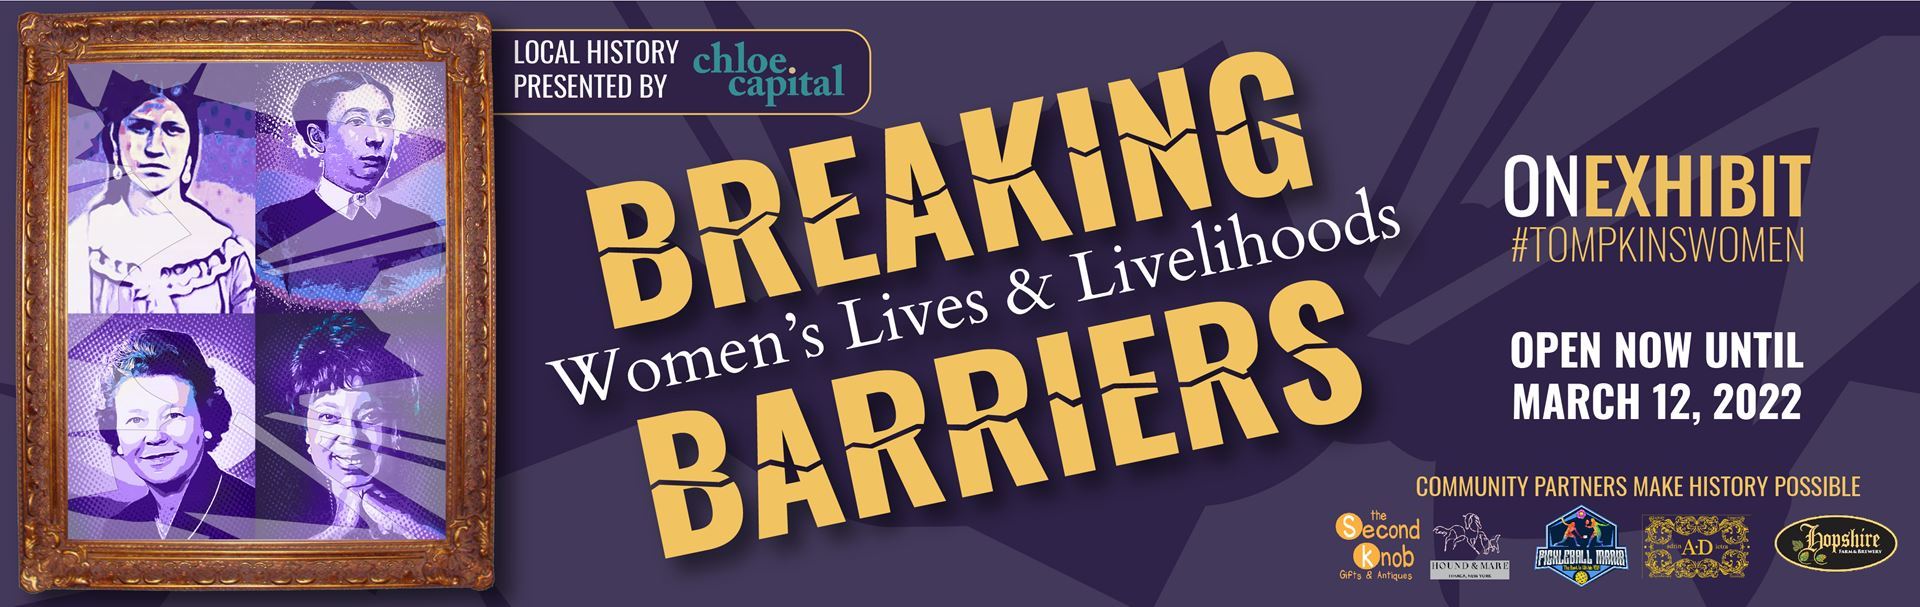 Rectangular area with a purple background. Left side has a square college displaying pictures of four women. The rest reads “Breaking Barriers, Women’s Lives and Livelihoods - On exhibit #TompkinsWomen - Open now until March 12, 2022” with acknowledgements to community partners and chloe capital. 